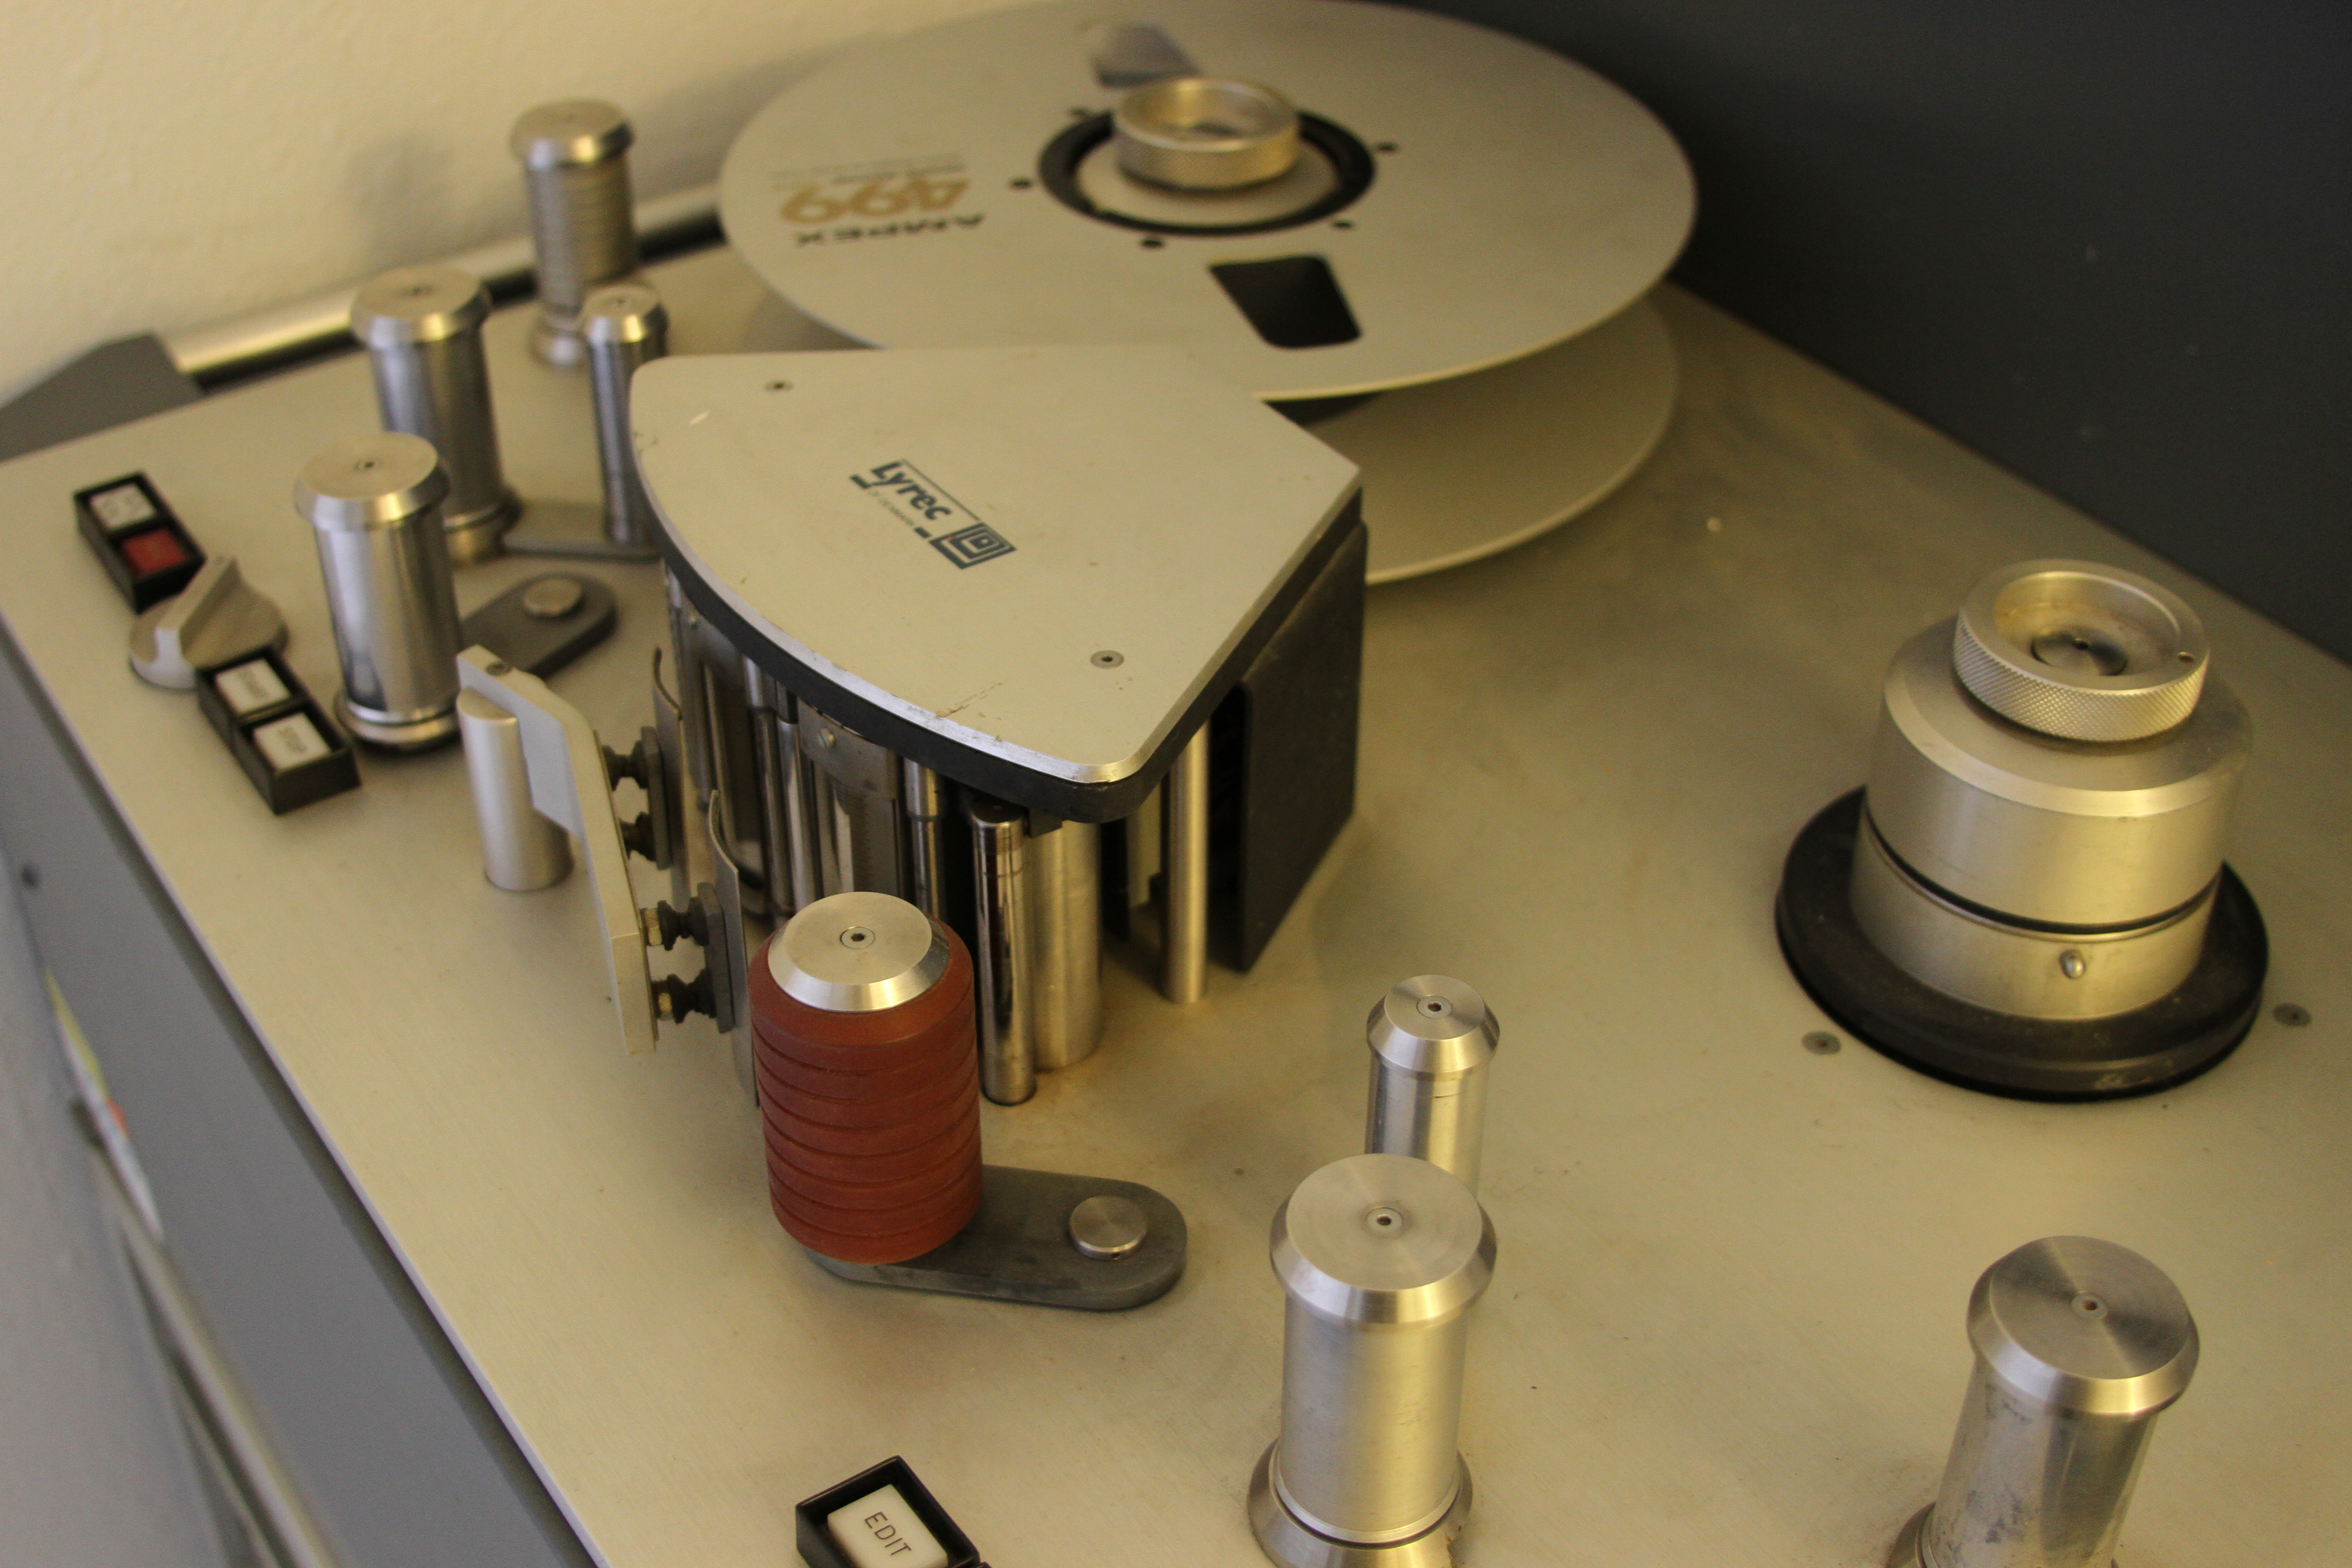 File:2 inch Tape Reel to Reel Recorder.JPG - Wikimedia Commons